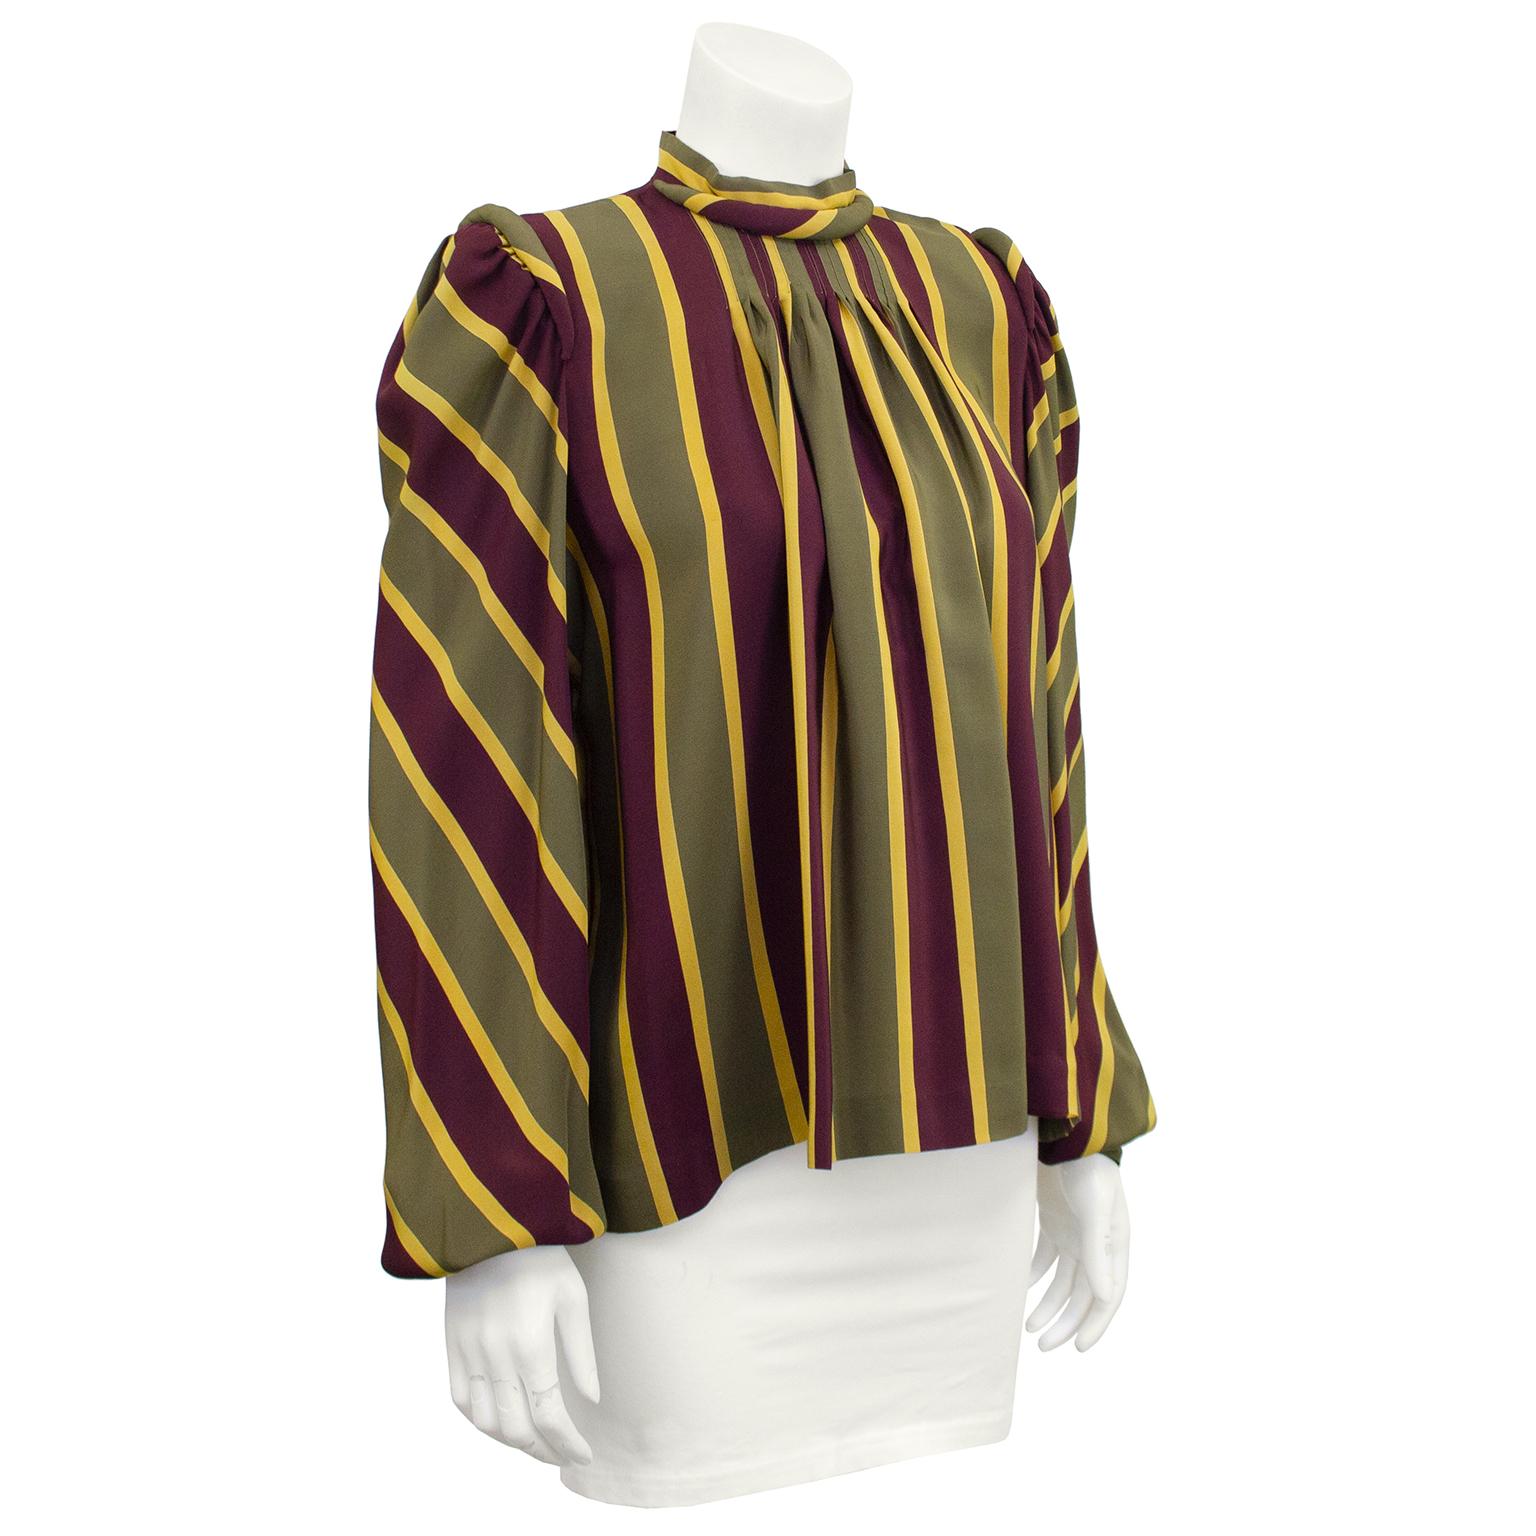 1980s Clementina Della Balda silk blouse. Olive green, burgundy and yellow vertical stripes run throughout the body and diagonal on the arms. Rolled details at neck and shoulders. Top stitching at bust with loose gathers that cascade into the